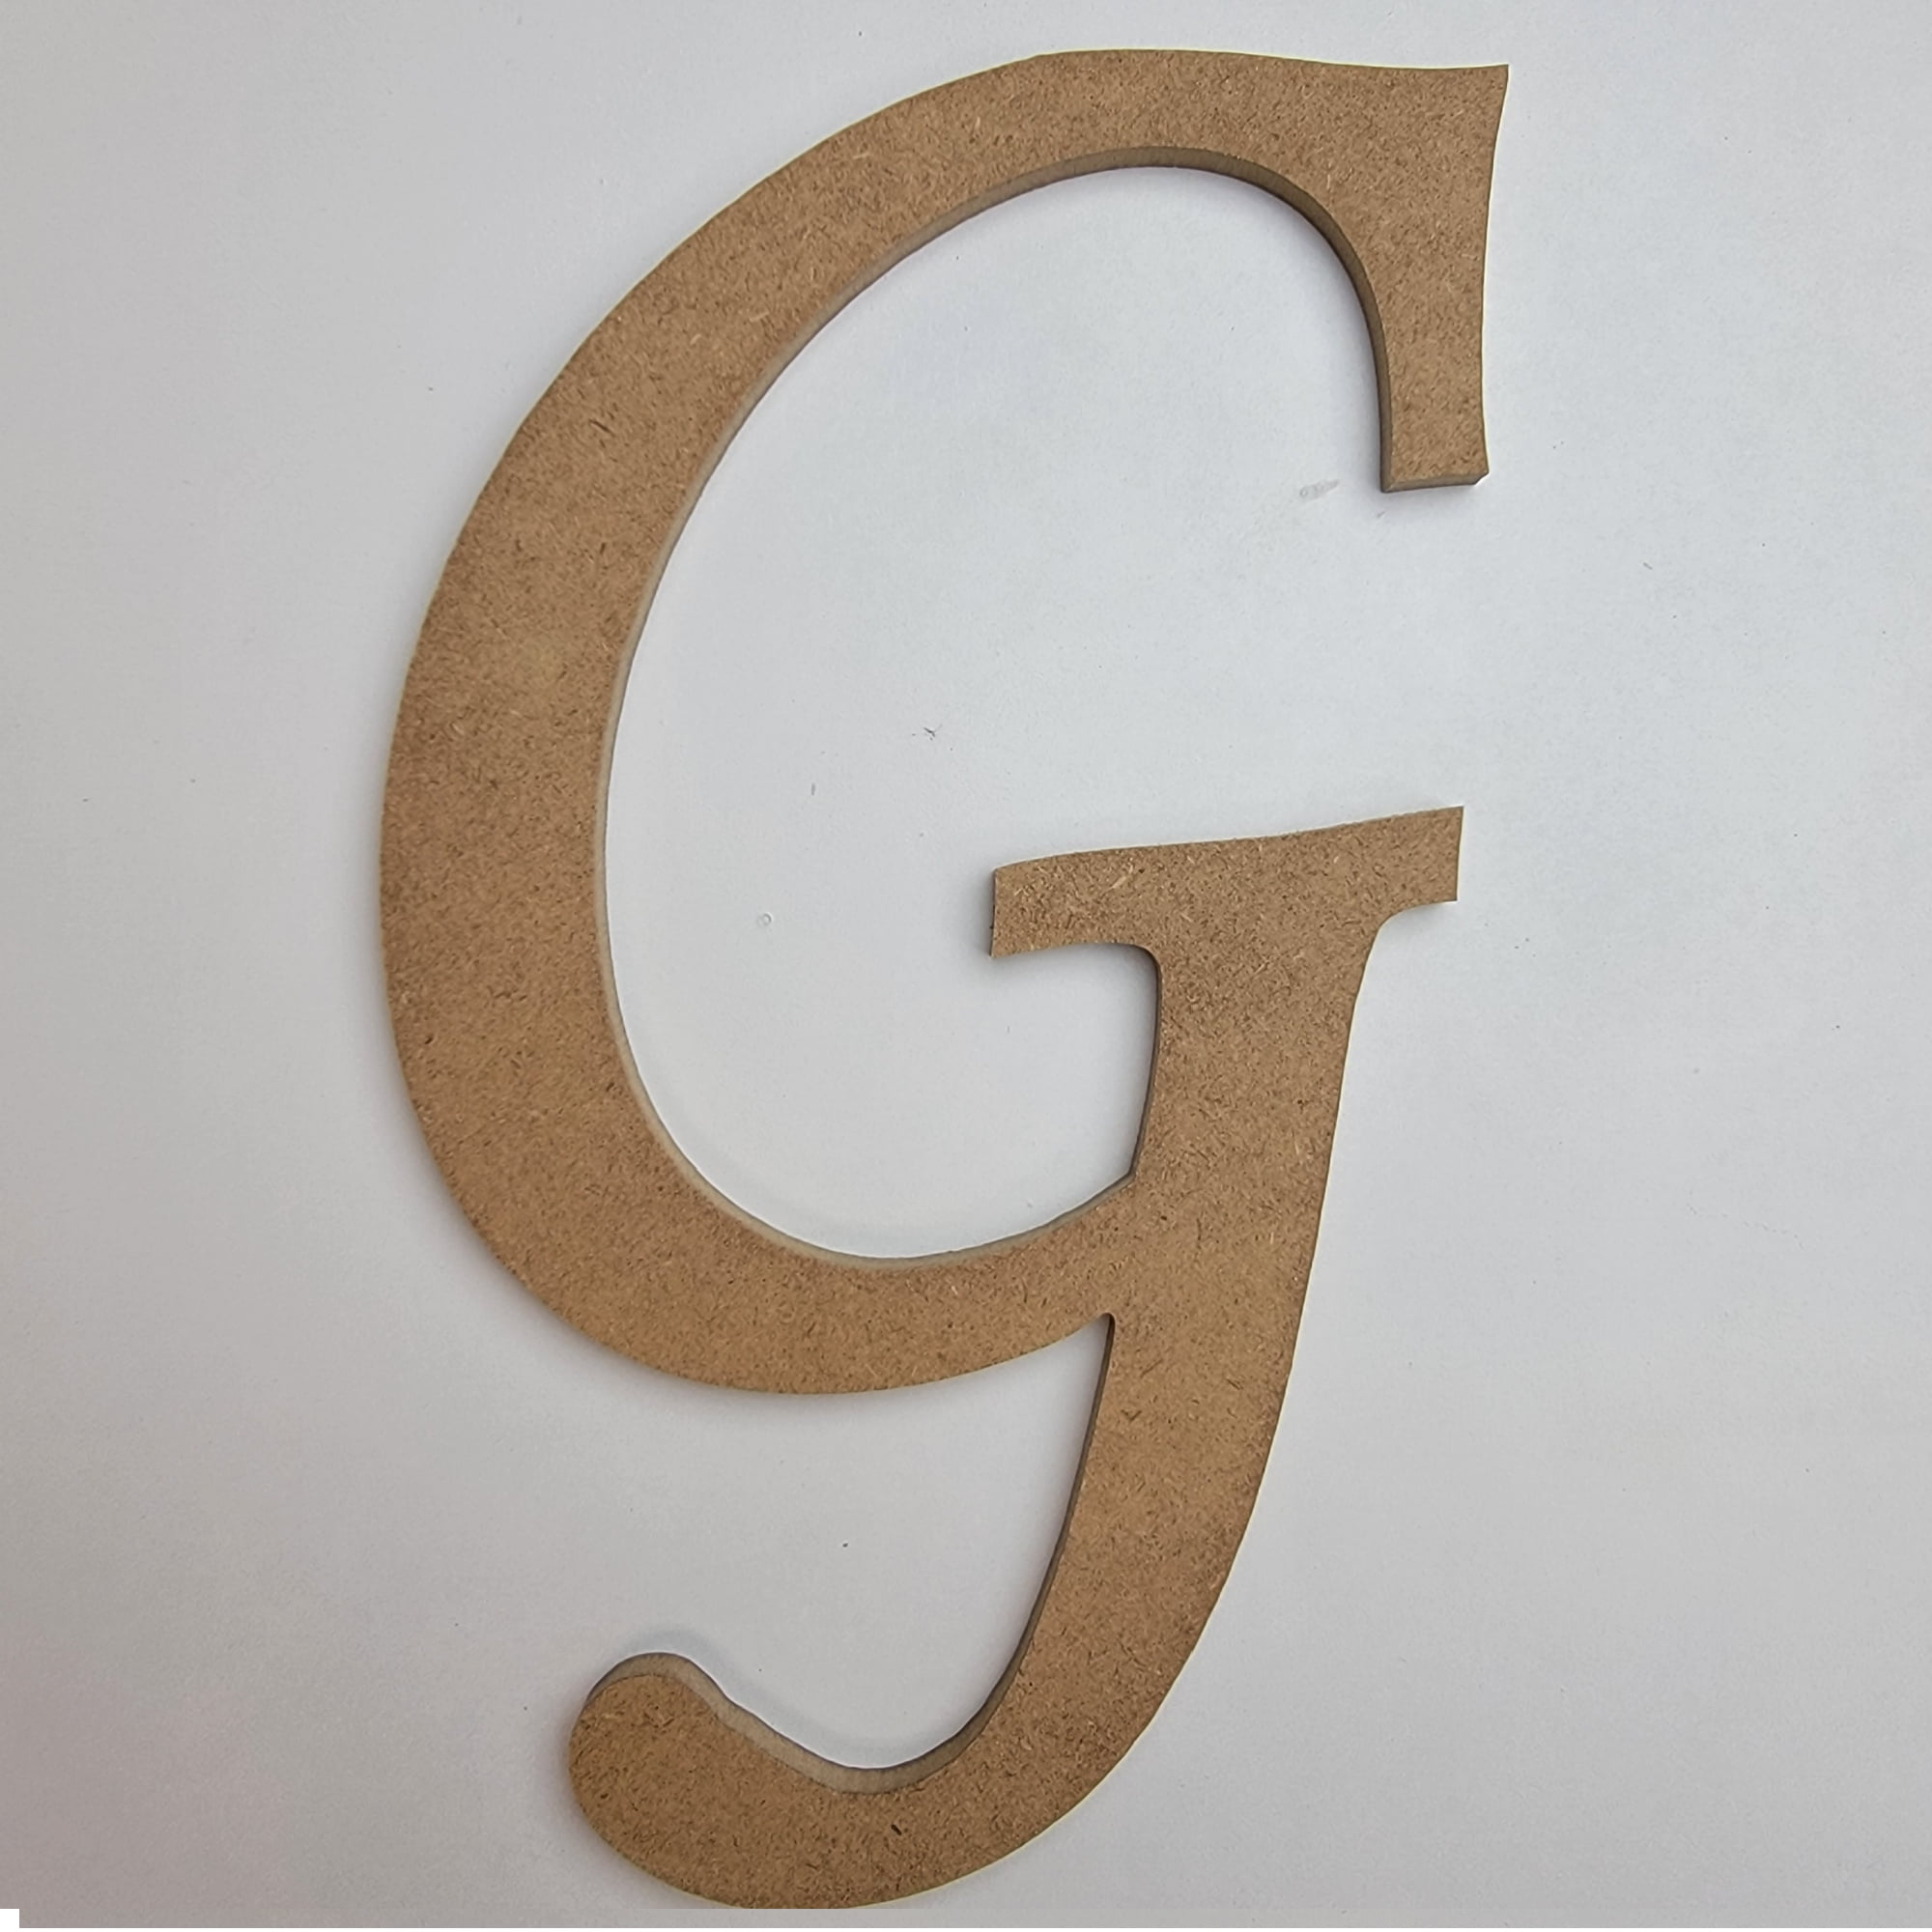 4 Wooden Letters 52 Pcs Wood Letters for Crafts Unfinished Wood Letters for Wall Decor/Letter Board/DIY/Painted/Educational 